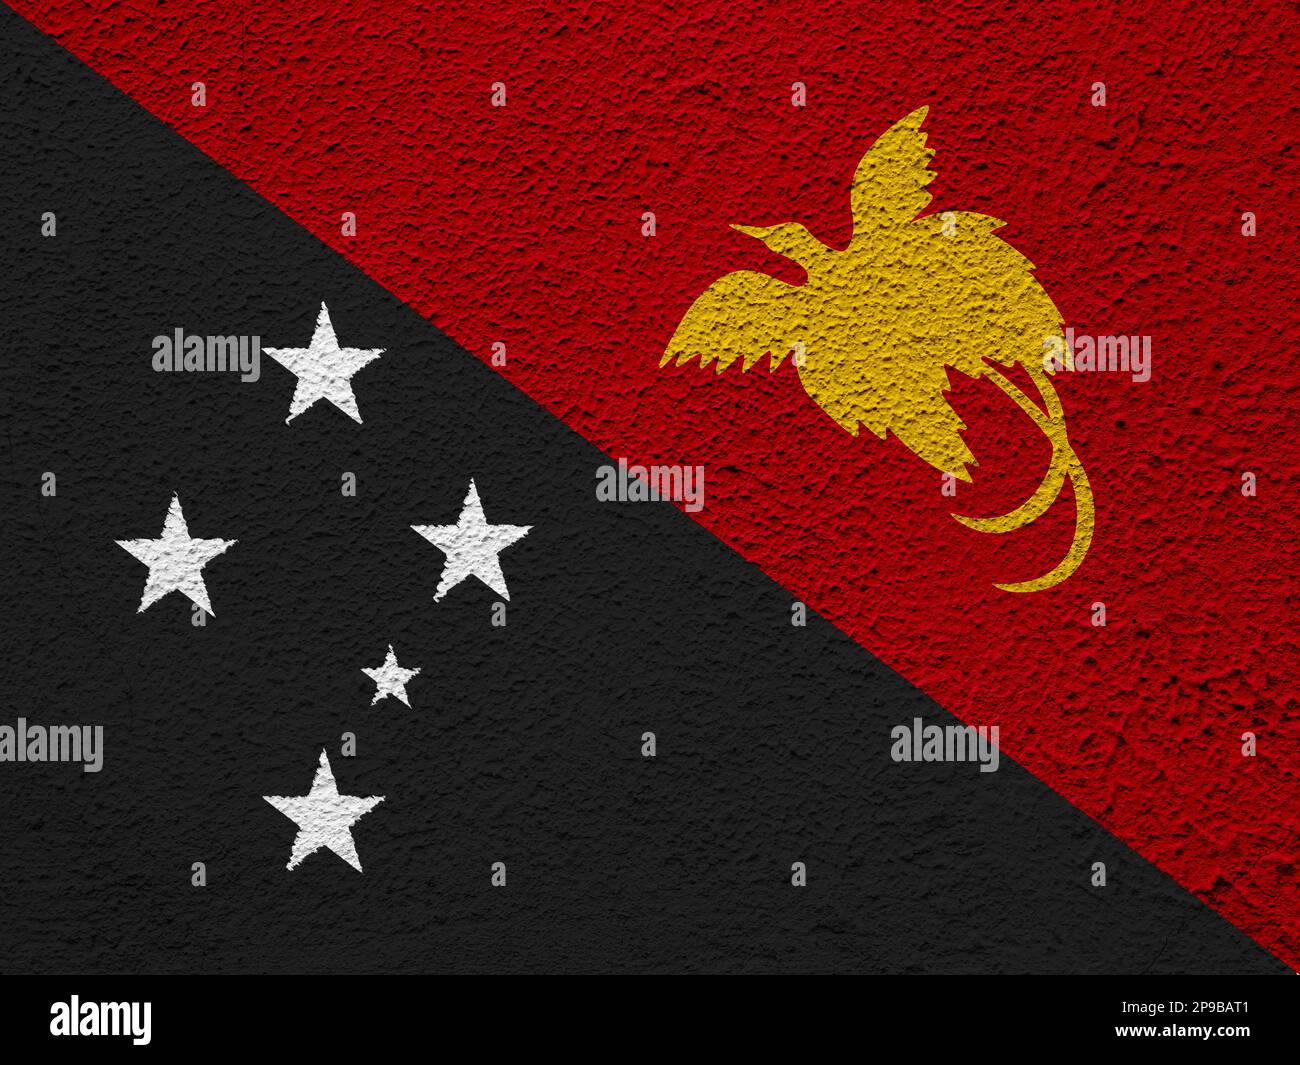 Flag of Papua New Guinea on a textured background. Concept collage. Stock Photo